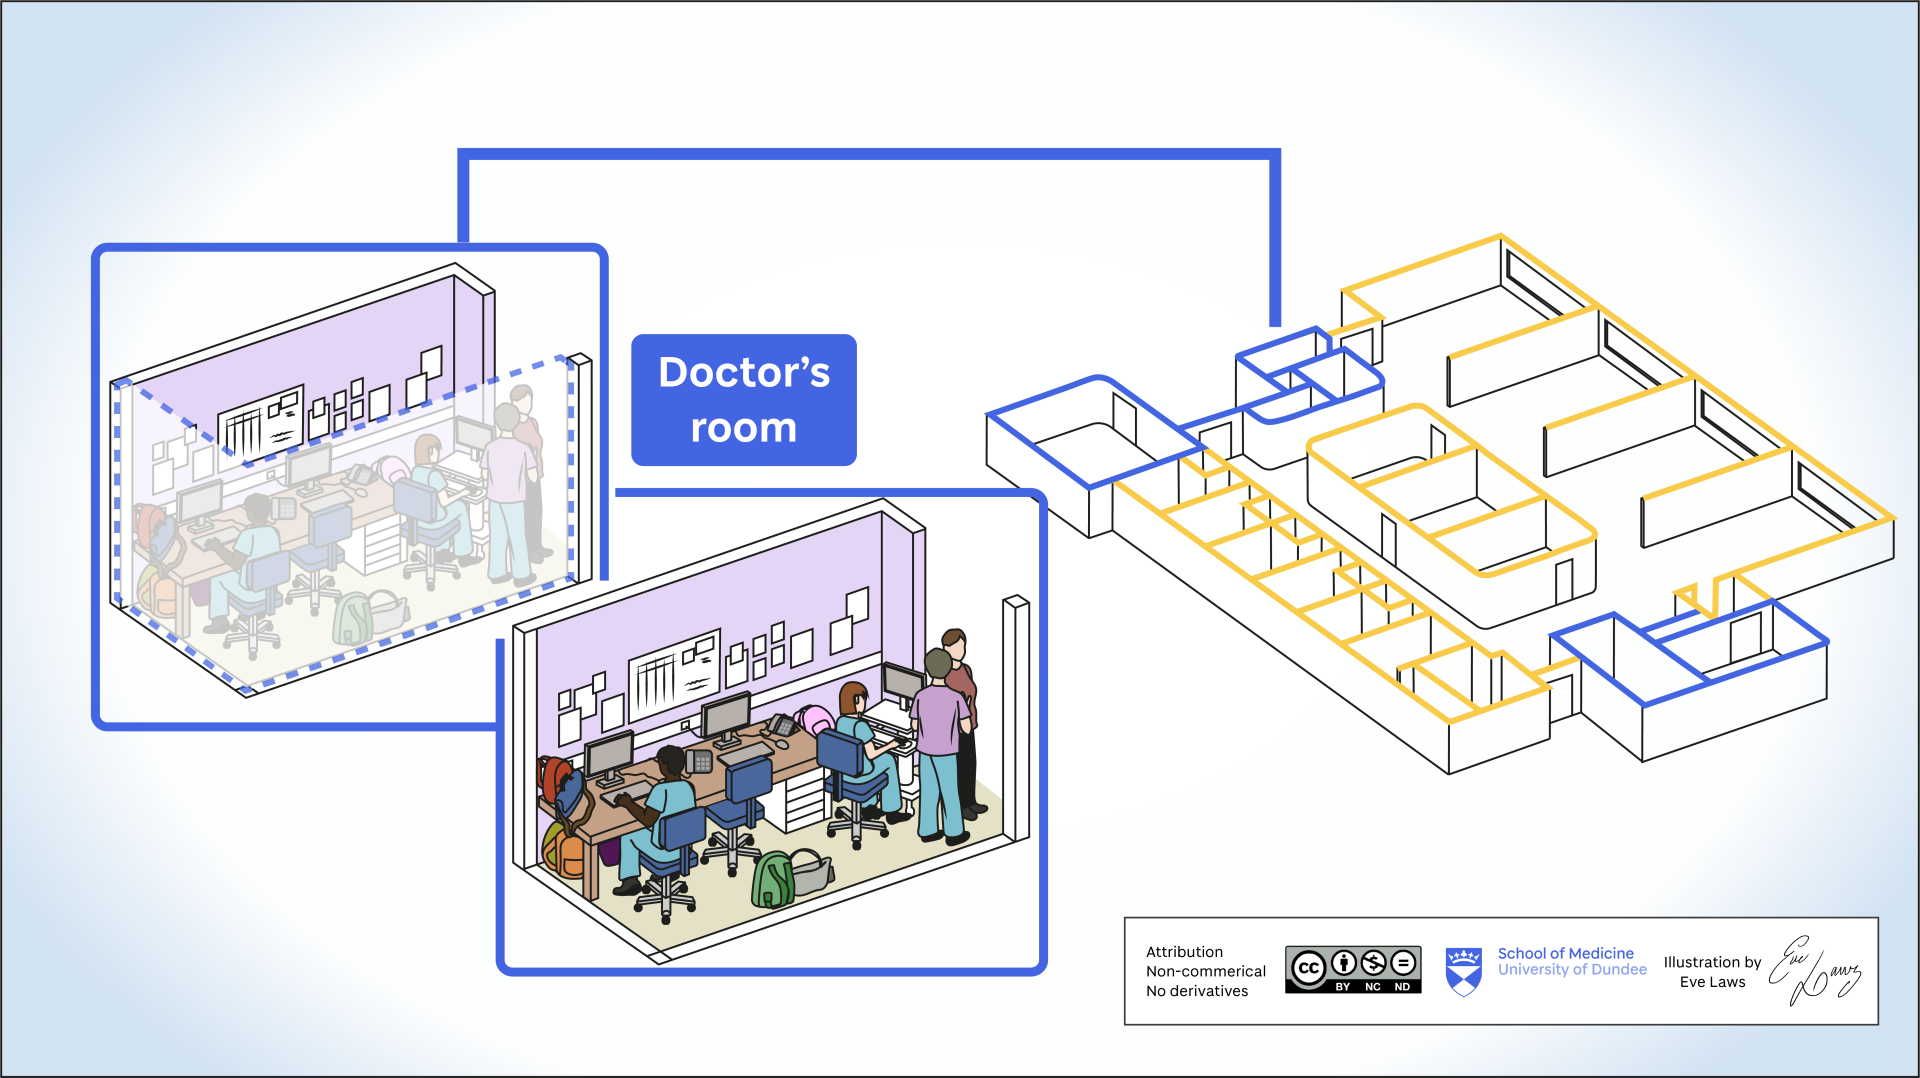 Doctor's room highlighted at full capacity and untidy - illustration